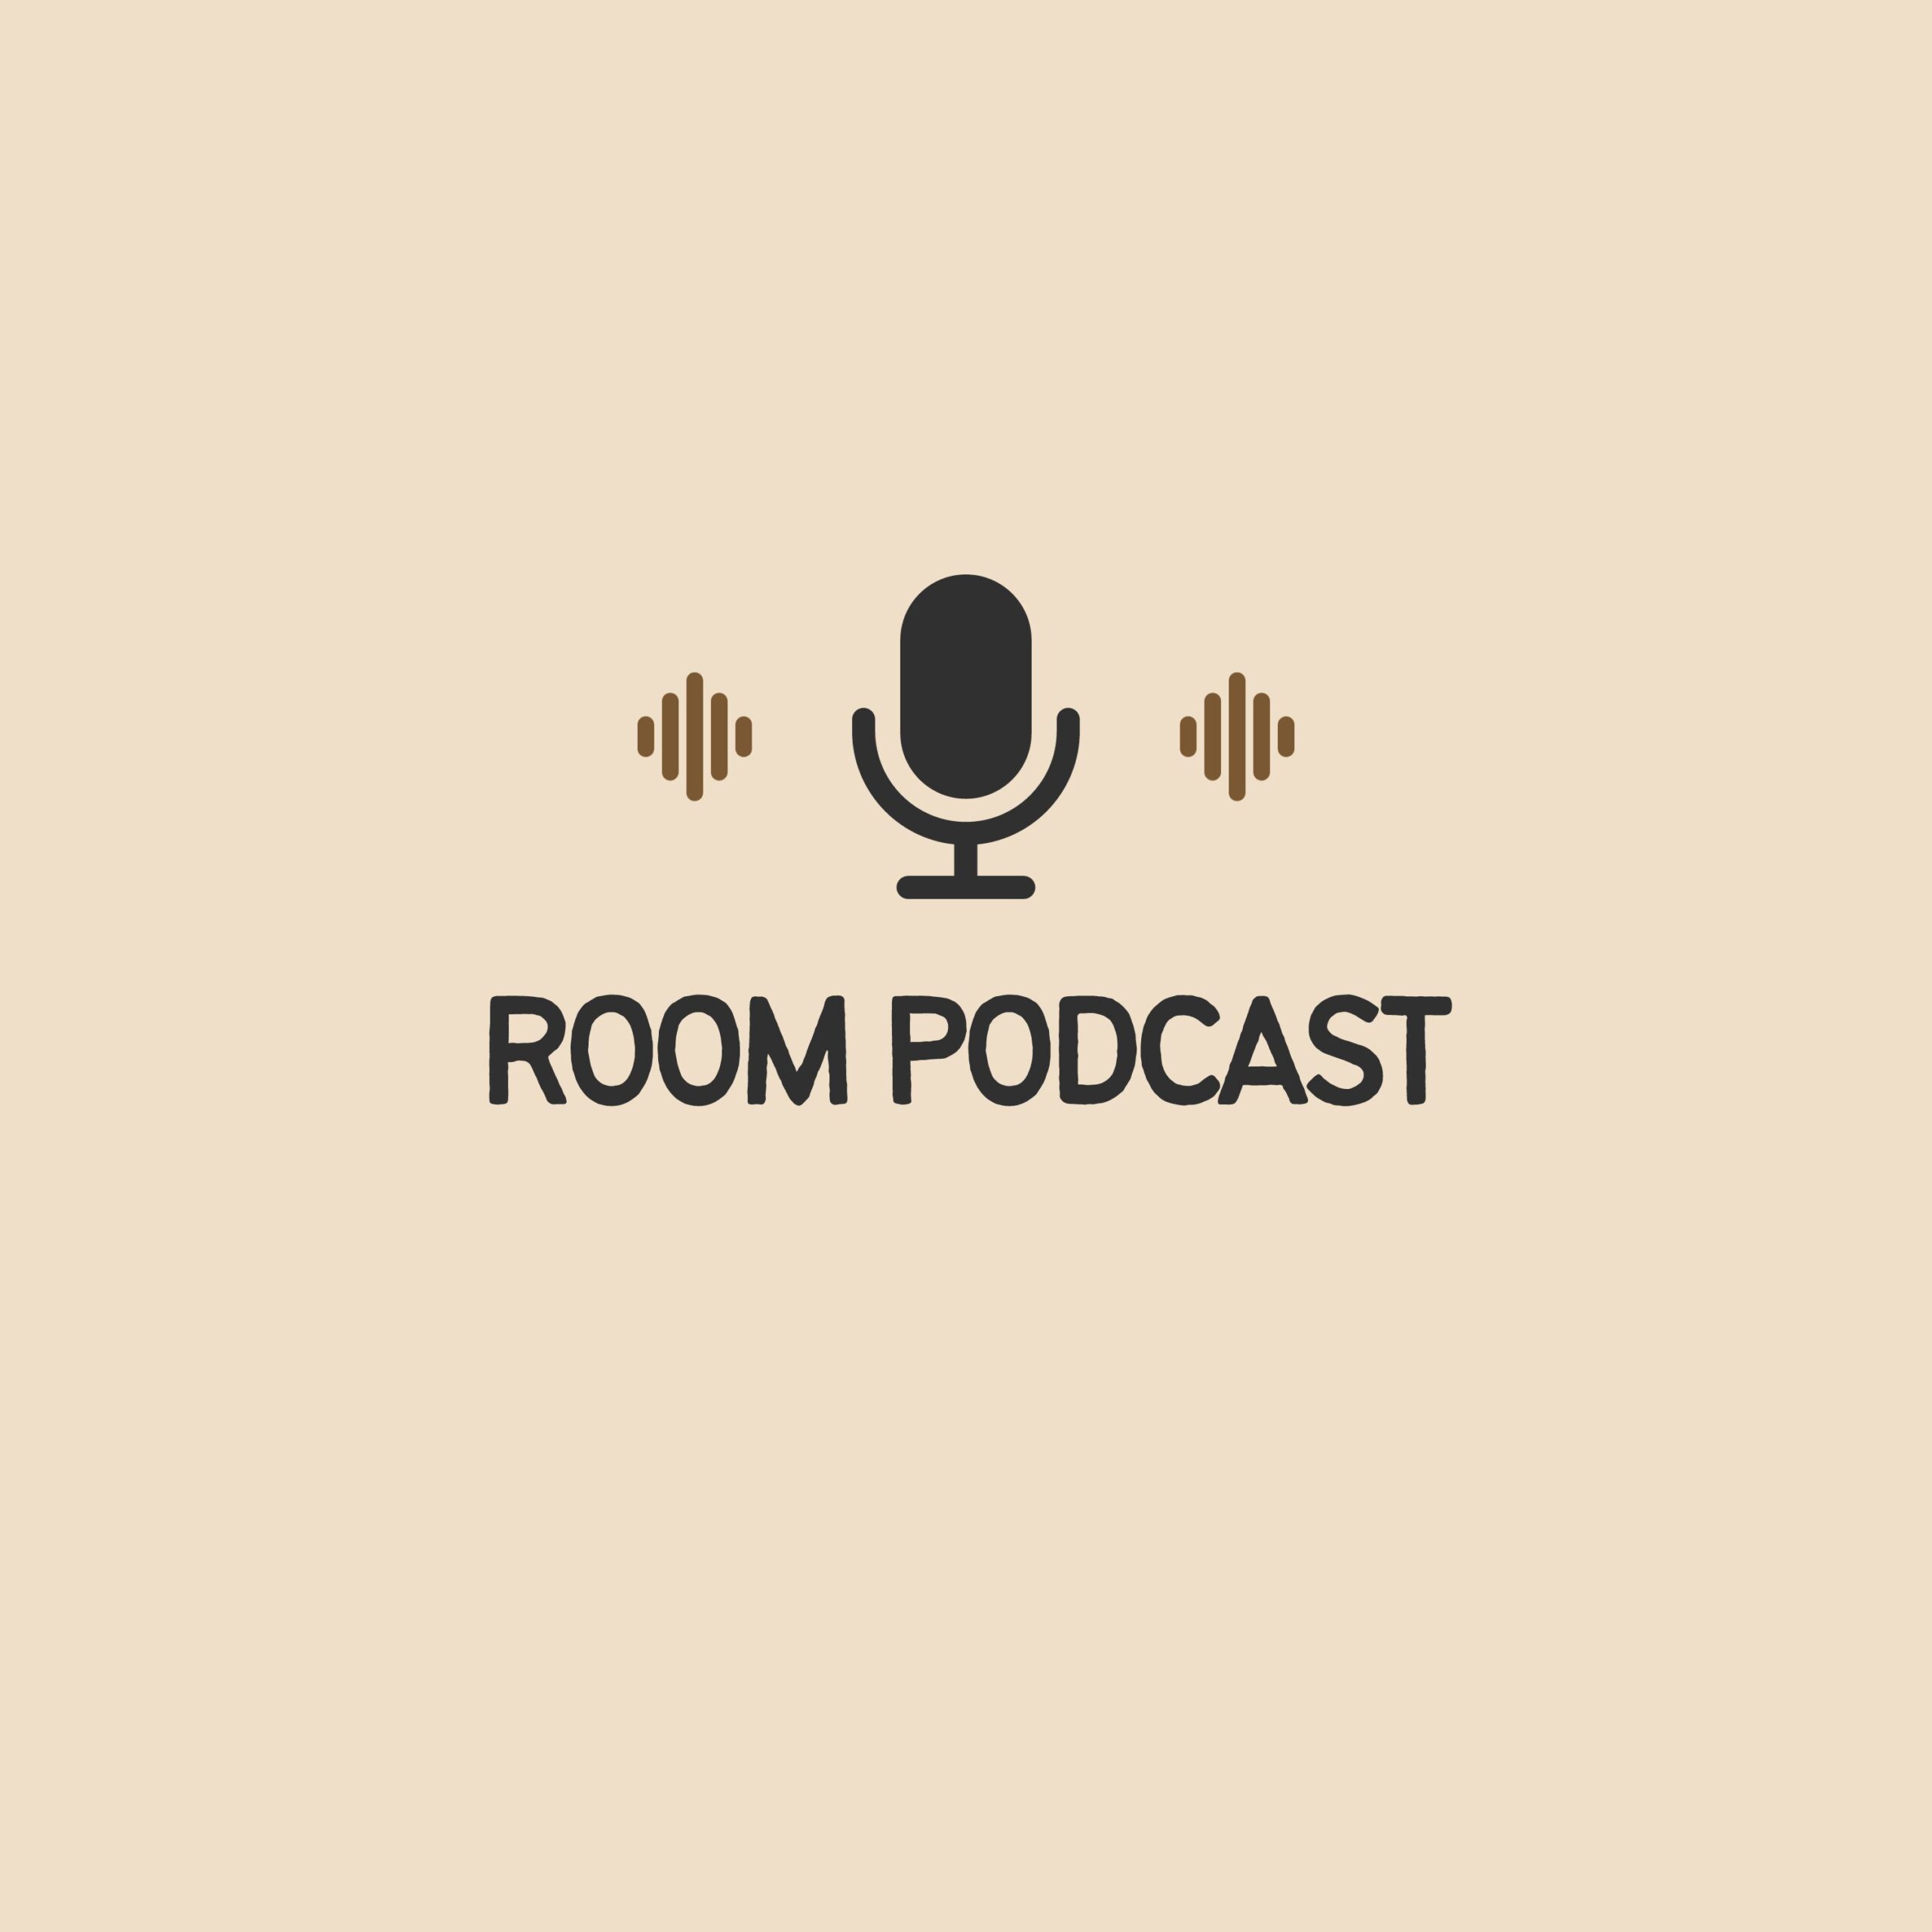 RoomPodcast.com domain name for sale